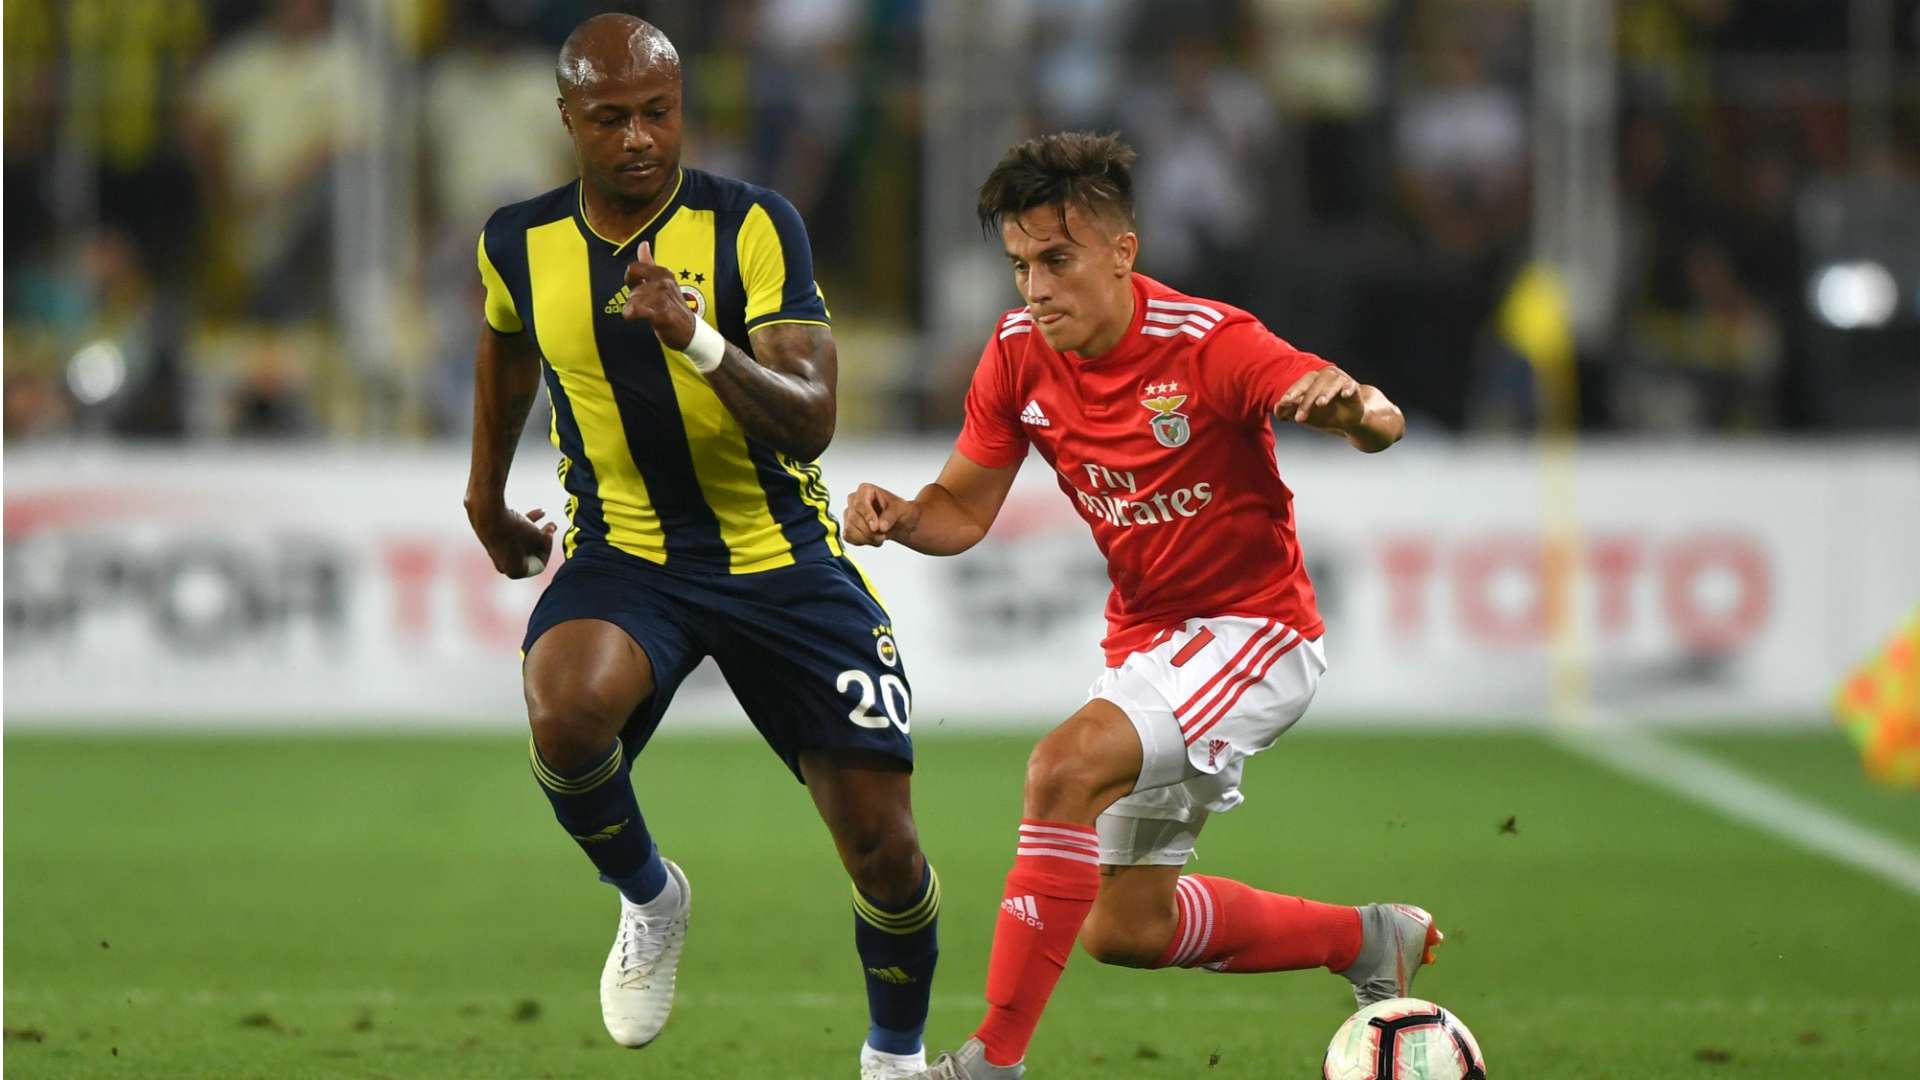 Andre Ayew - Fenerbache vs. Benfica, UCL qualifiers, August 15